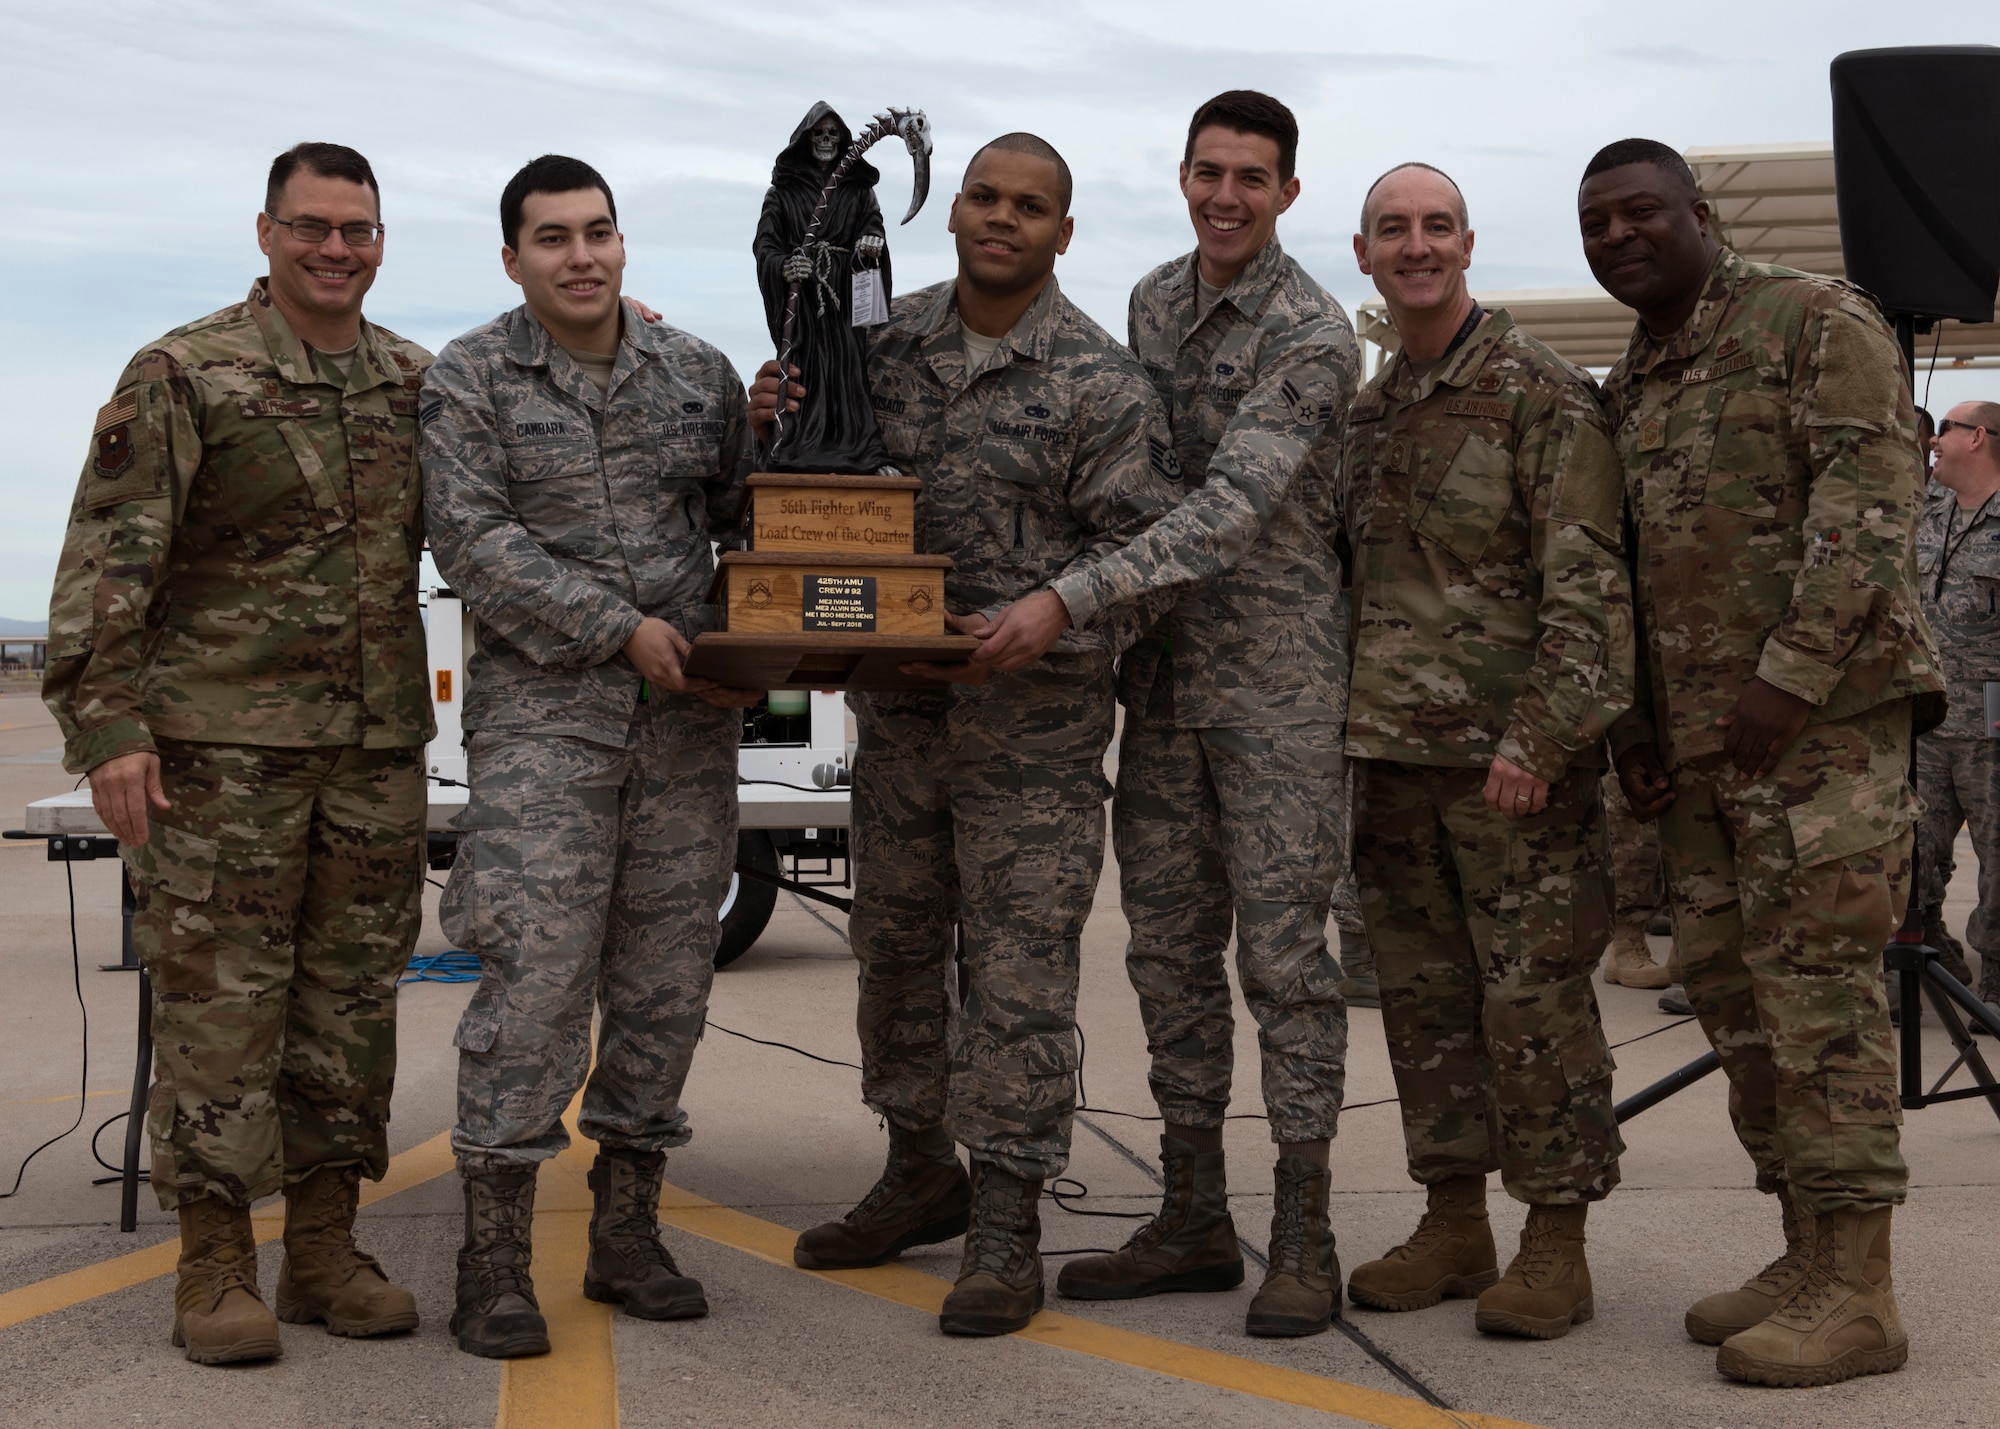 The 310th Aircraft Maintenance Unit load crew team accepts a trophy after the 56th Fighter Wing Quarterly Load Crew Competition at Luke Air Force Base, Ariz., Jan. 10, 2019.